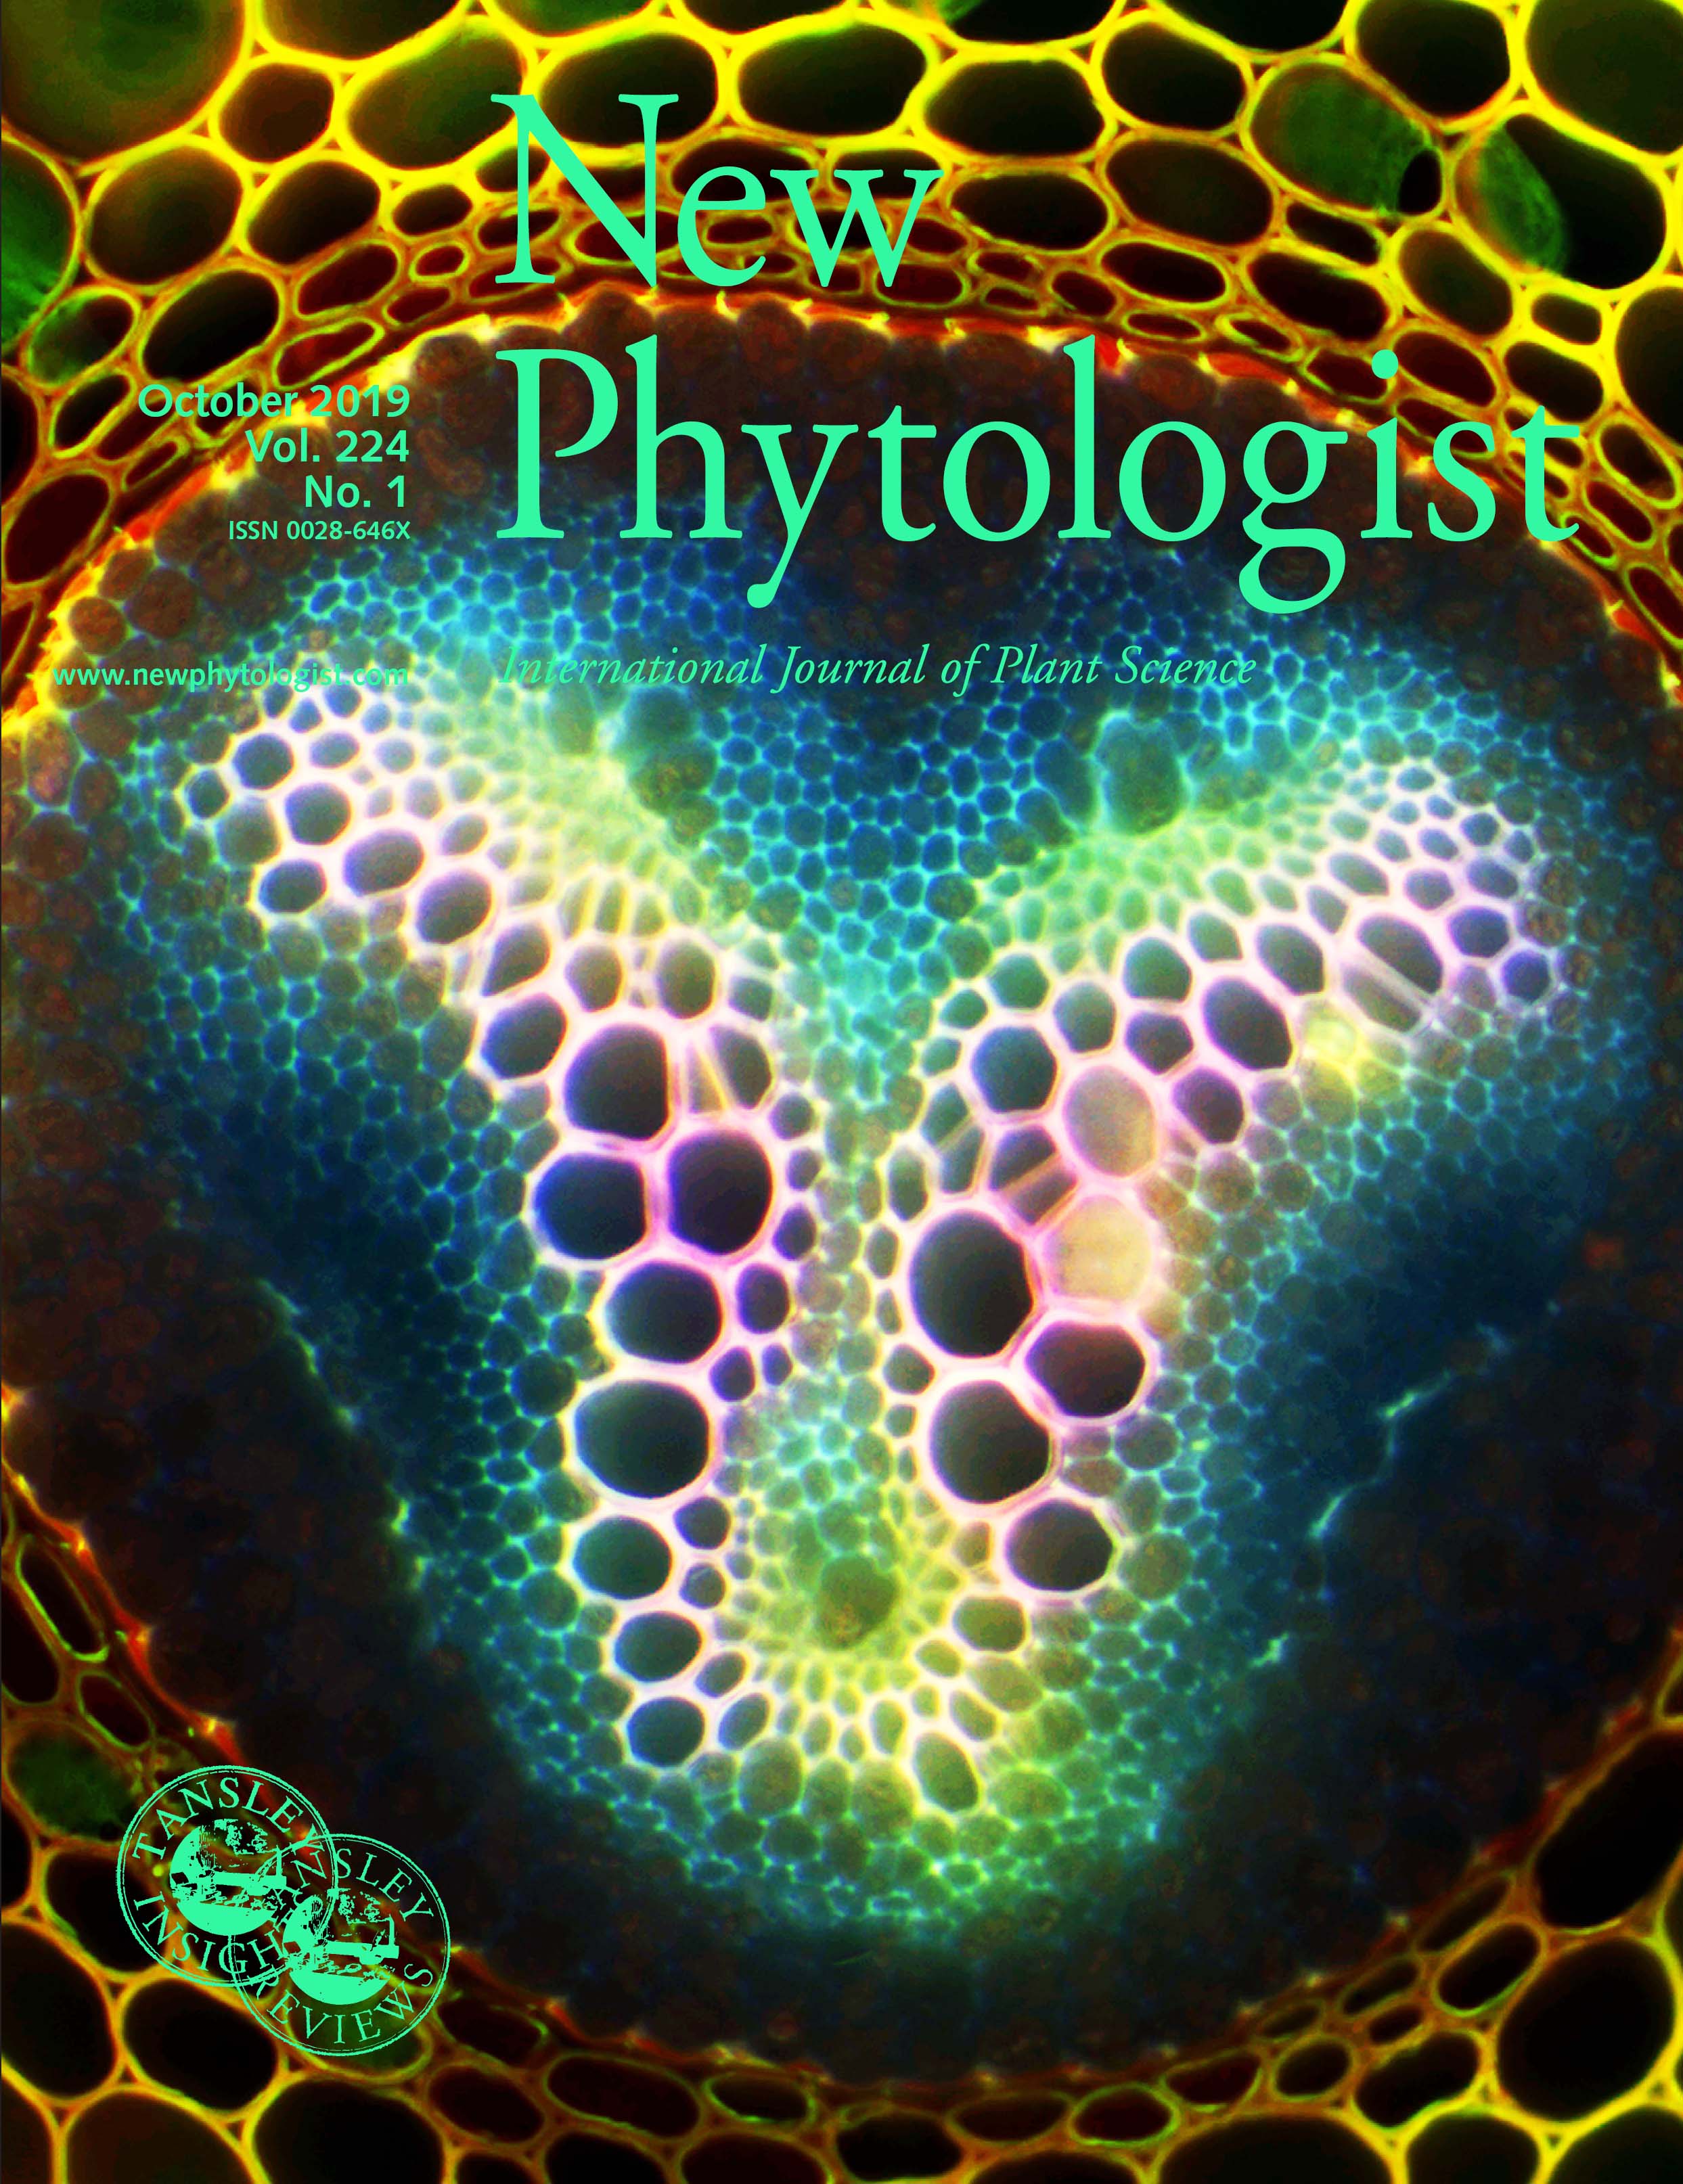 New phytologist journal cover Oct 2019